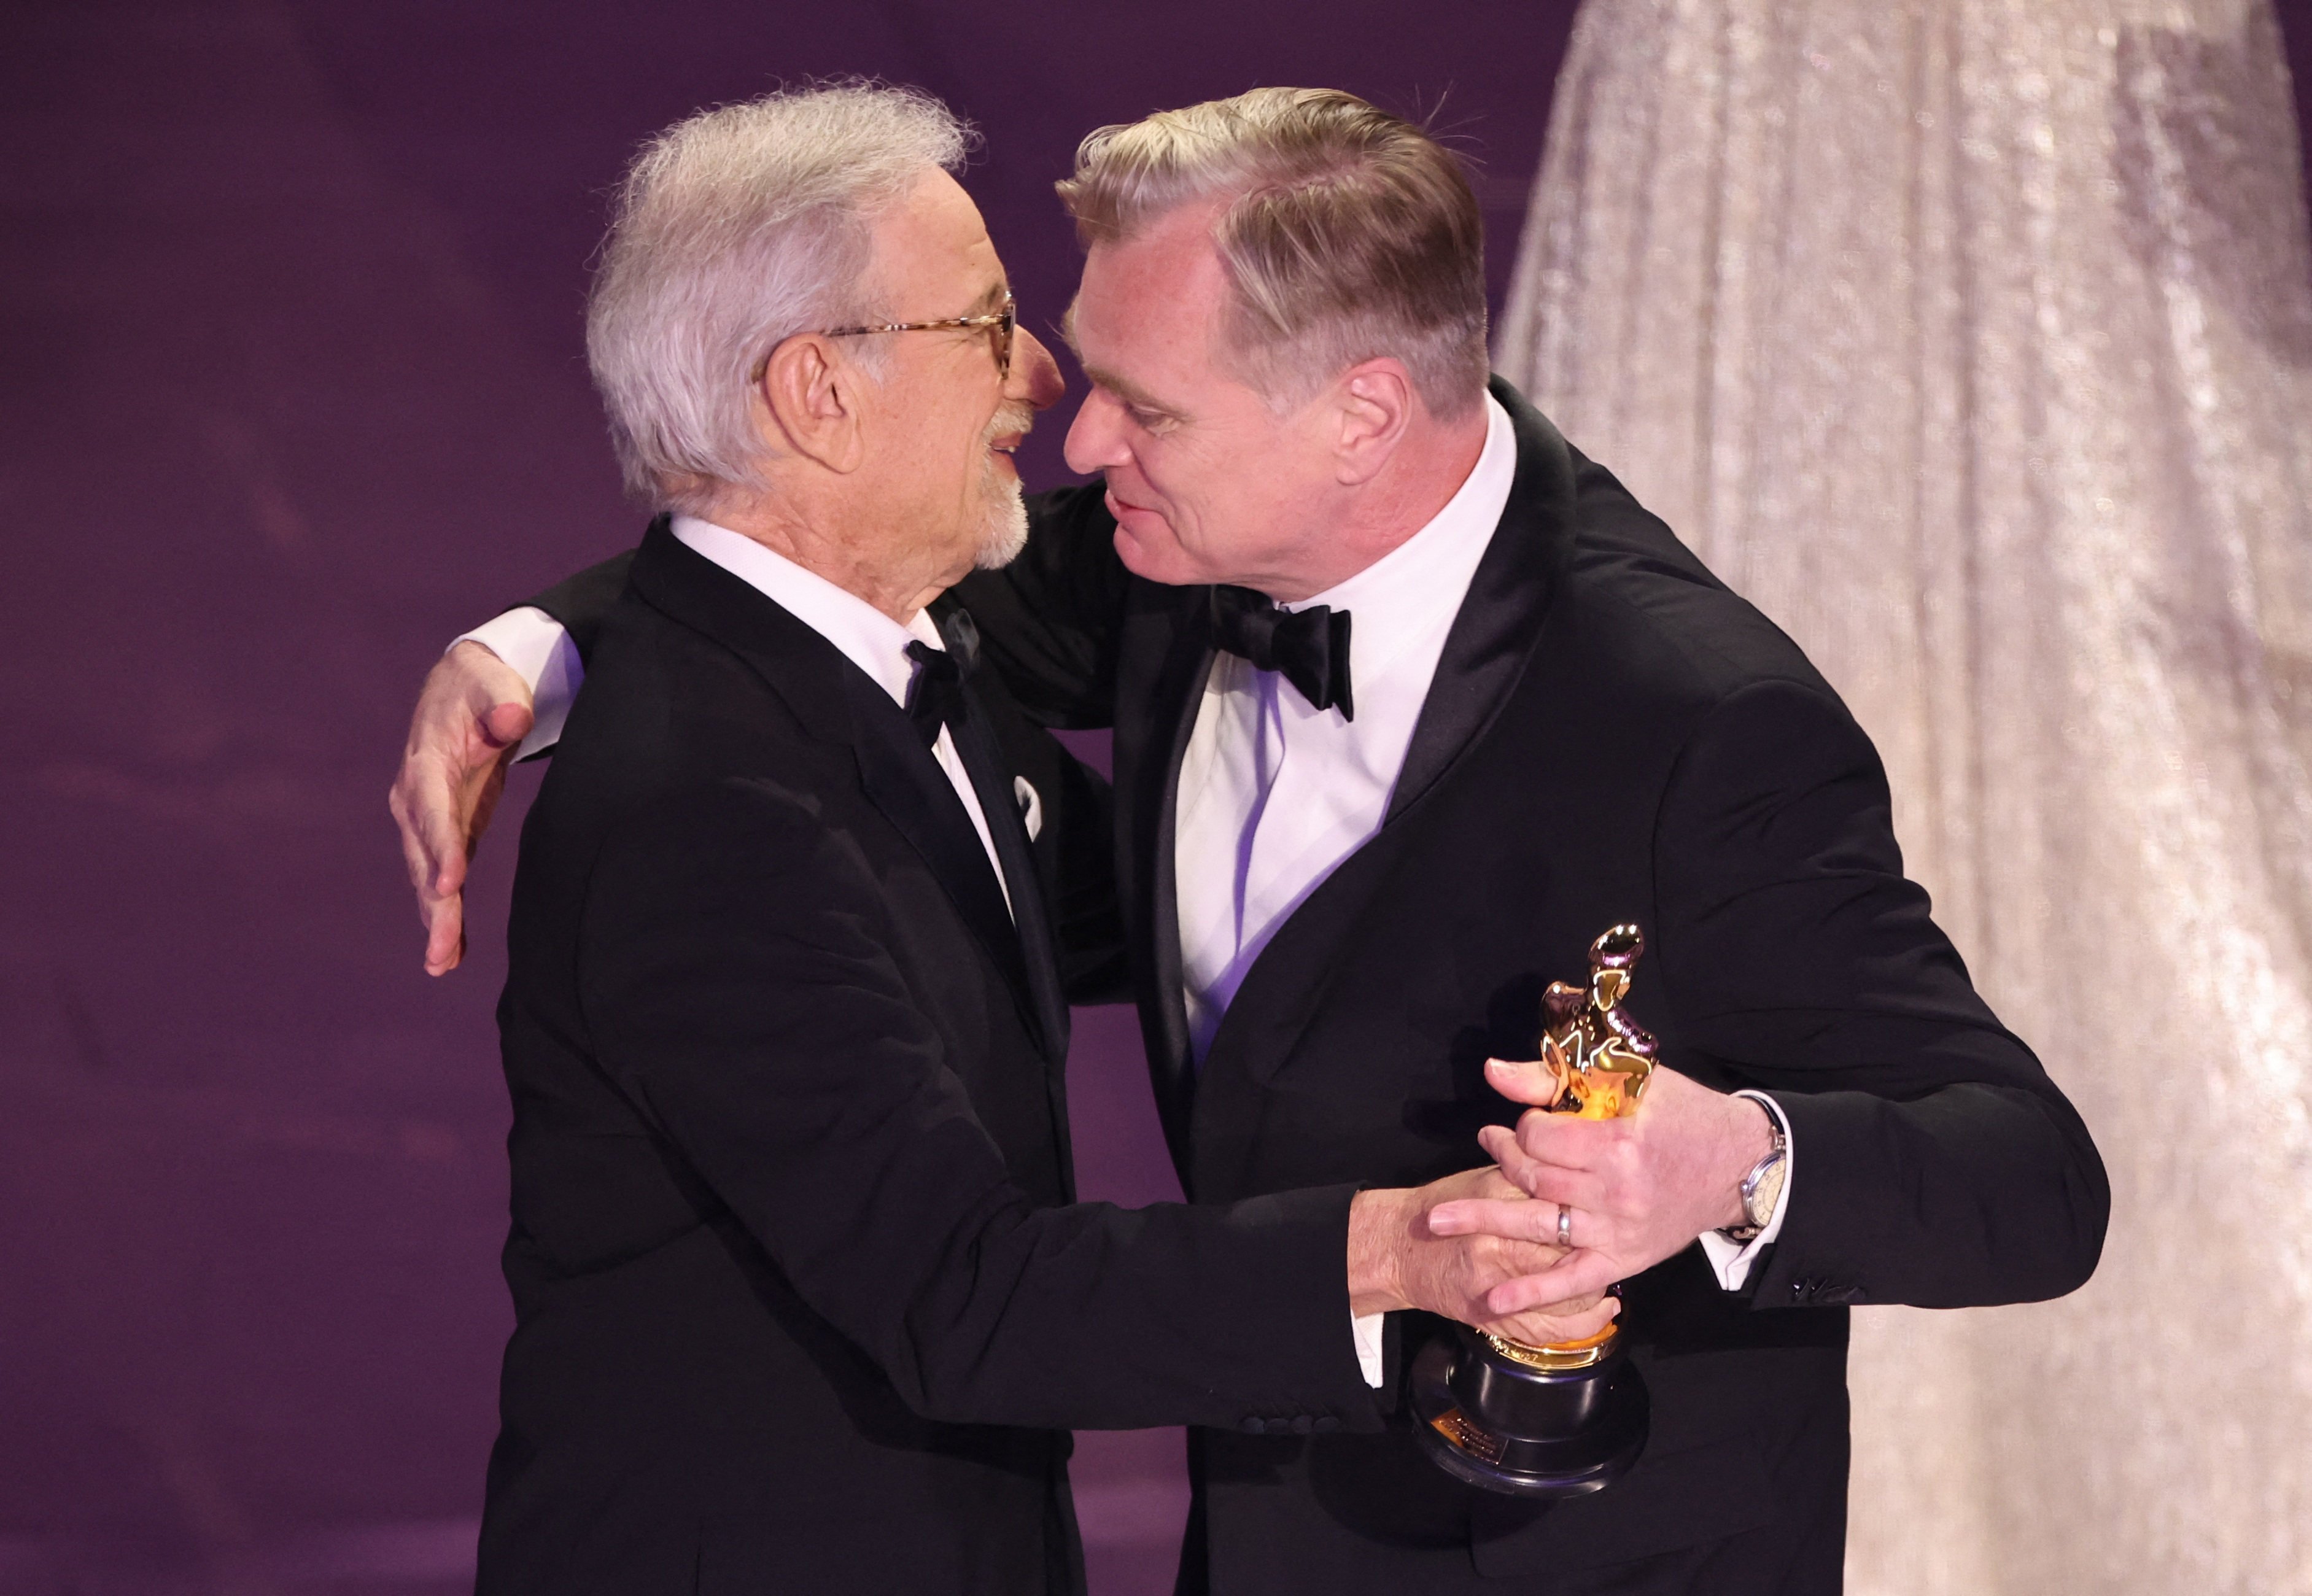 Christopher Nolan accepts the Oscar for best director for Oppenheimer from presenter Steven Spielberg during the 96th Academy Awards ceremony in Hollywood. The film went on to win best director, and earned five other Oscars. Photo: Reuters